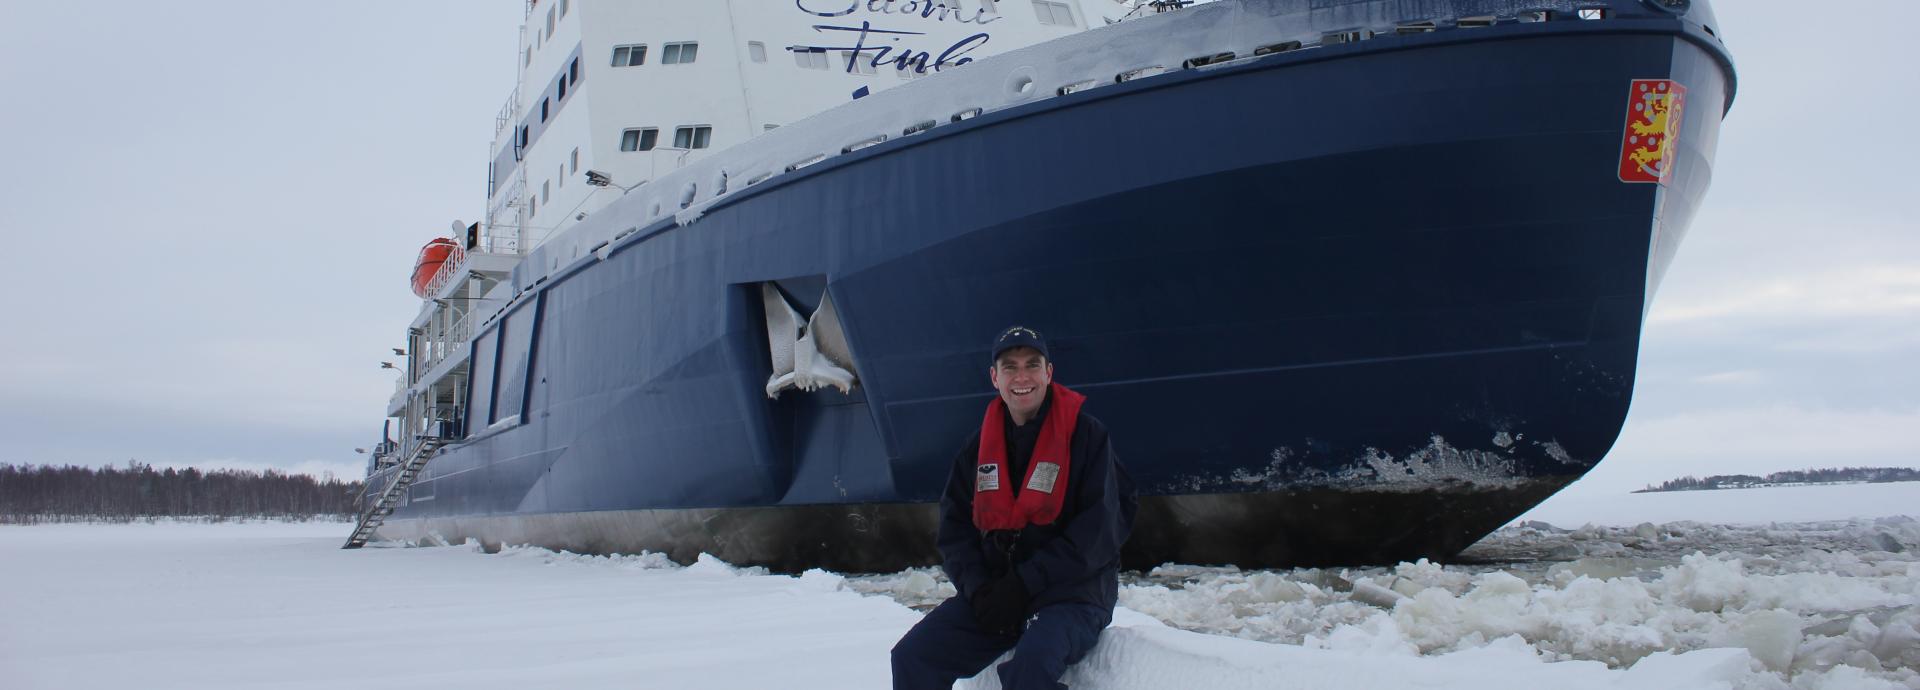 Fulbright Finland Mid-Career Professional Development program participant in front of a Finnish icebreaker.